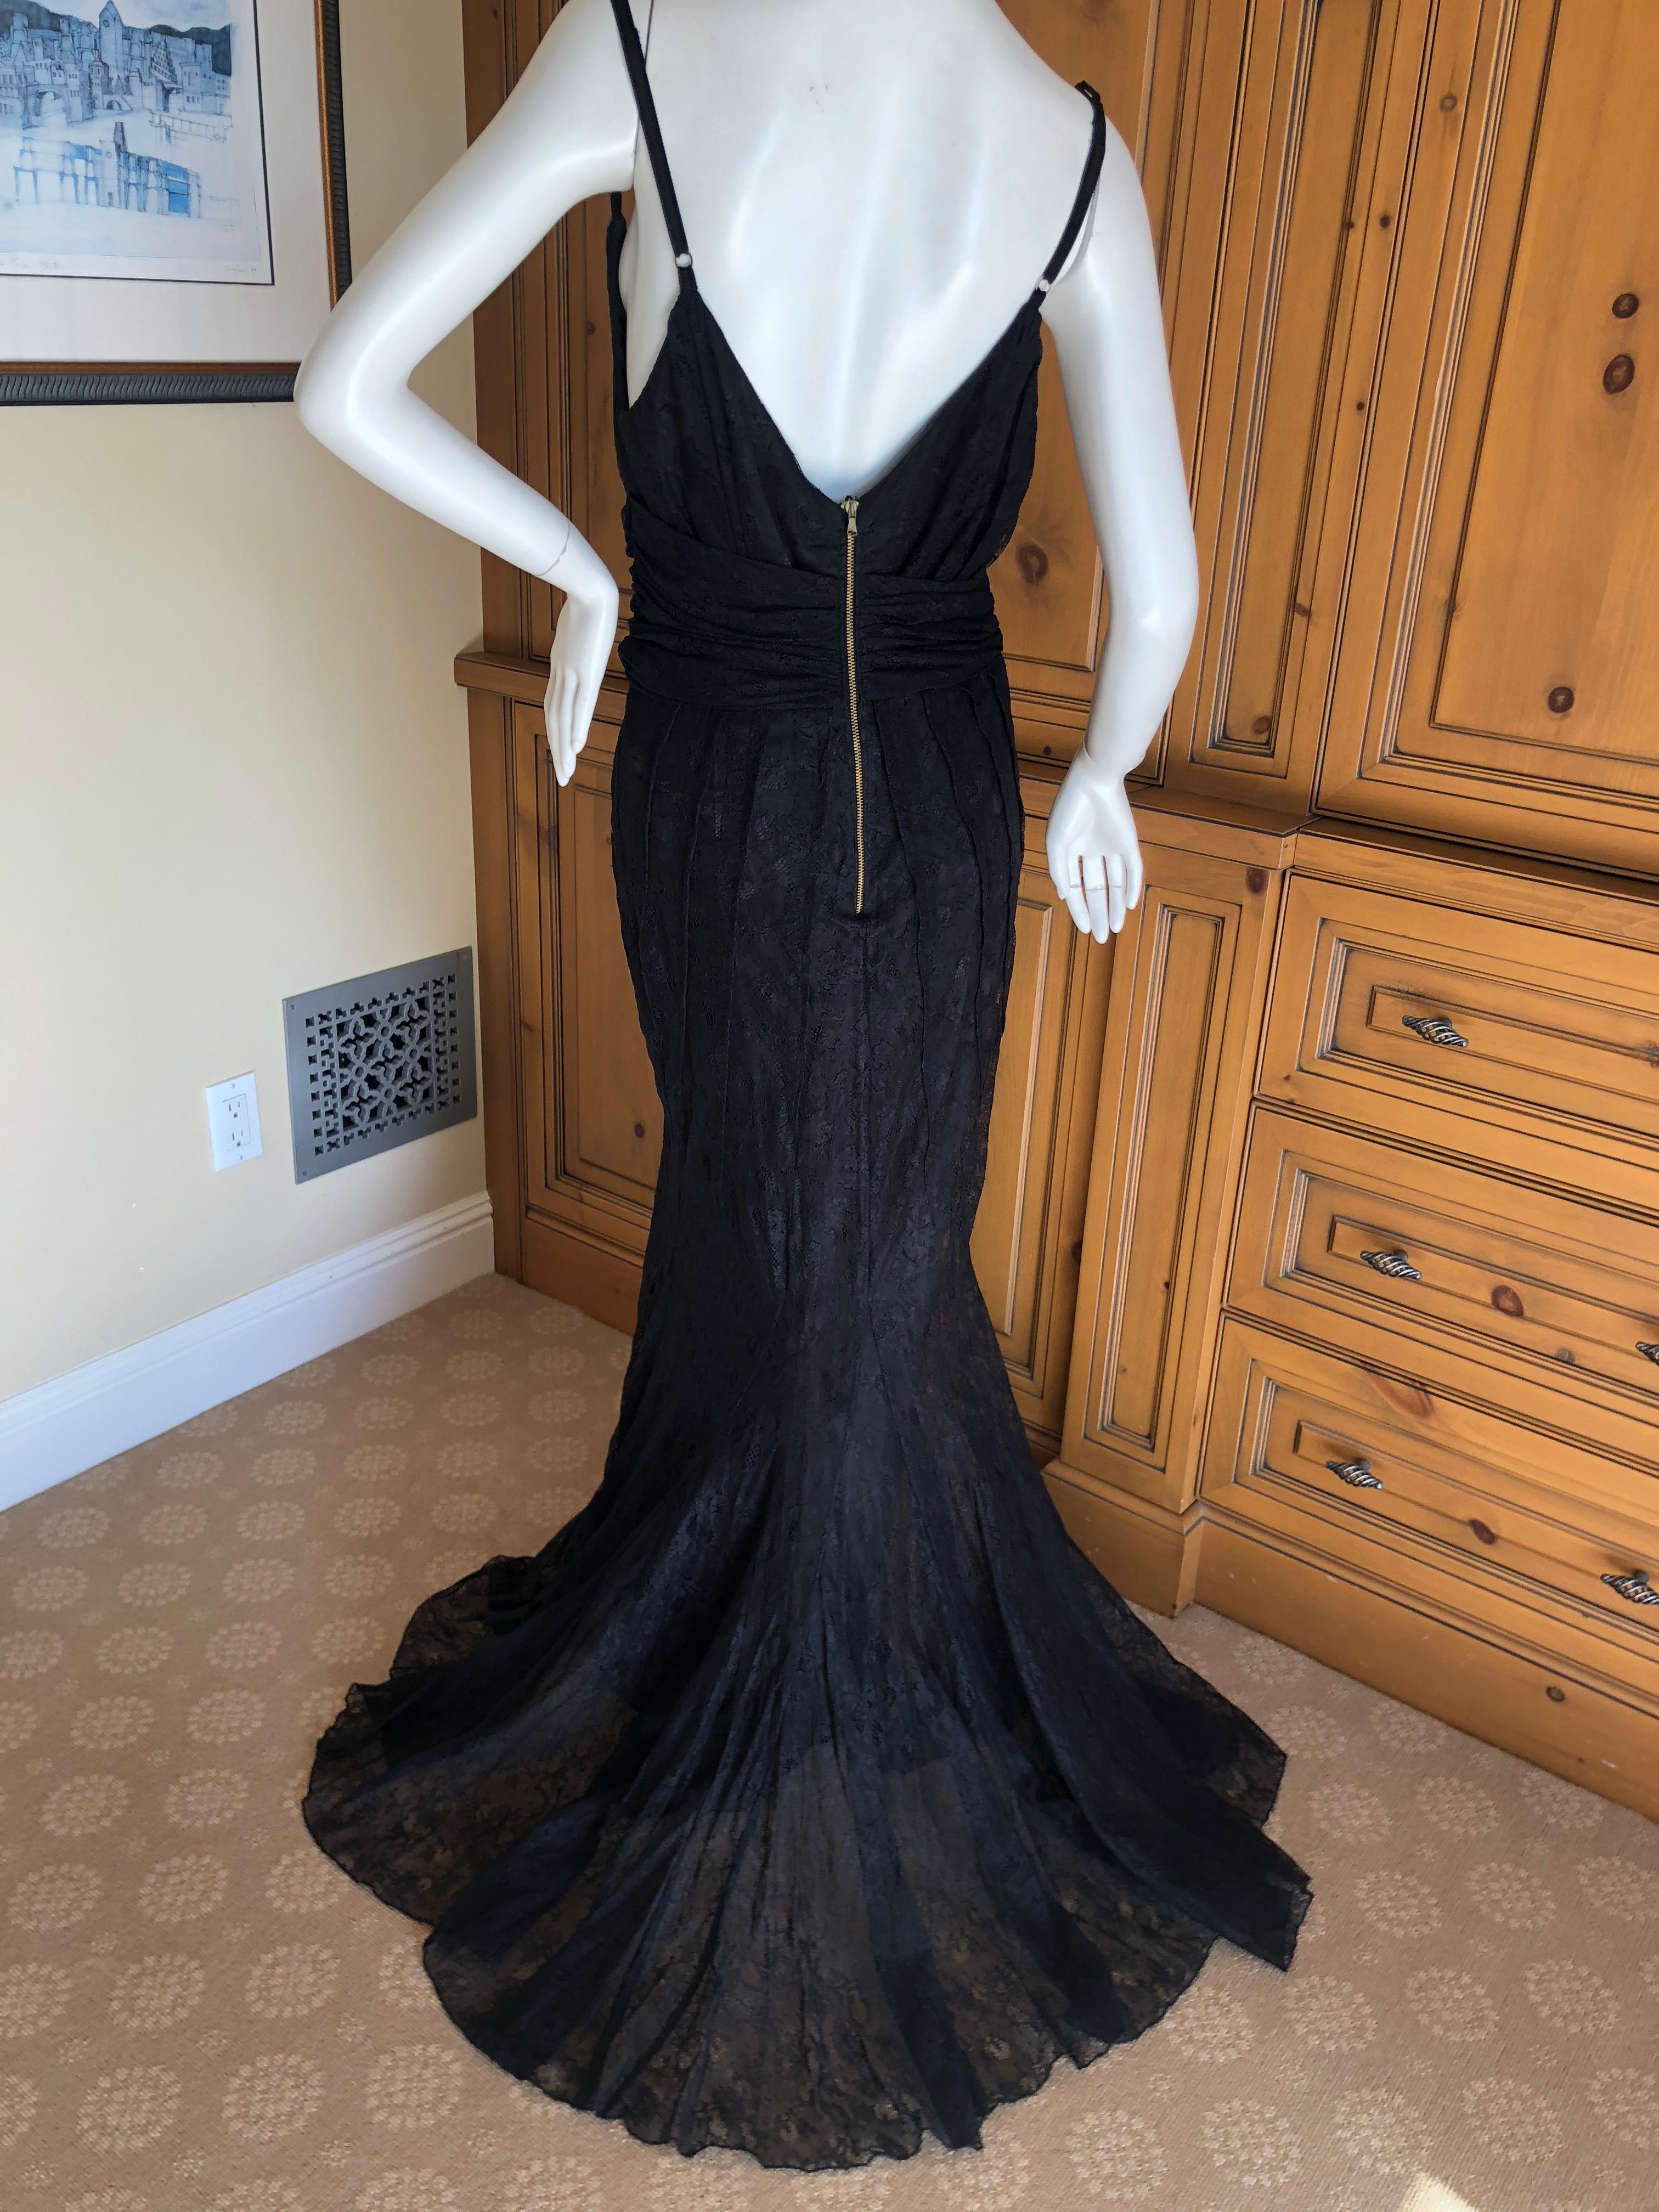 D&G Dolce & Gabbana Sheer Black Lace Vintage Evening Dress with Train For Sale 4